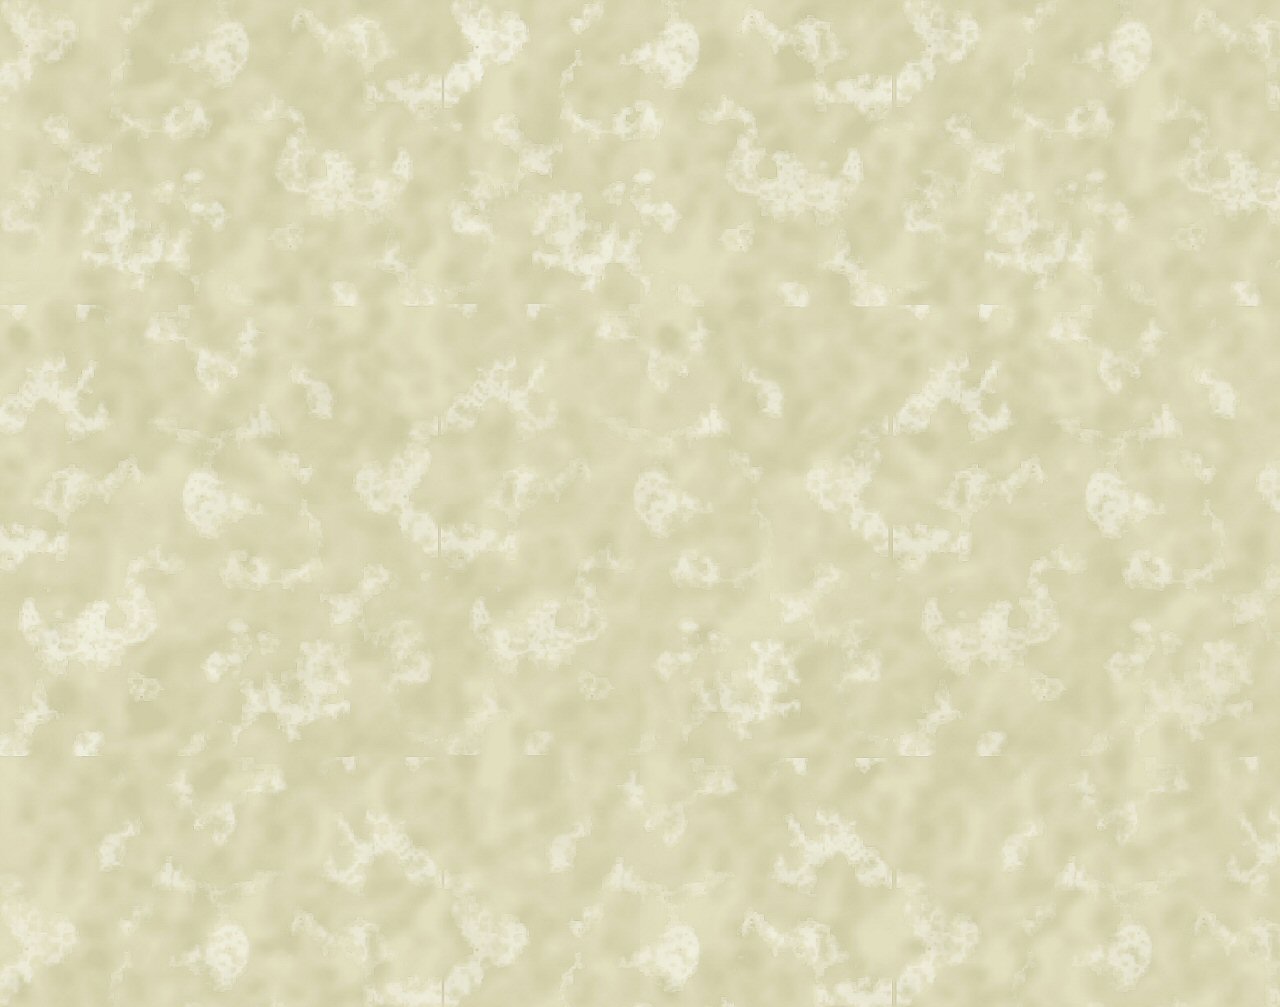 Creamy Texture Backgrounds